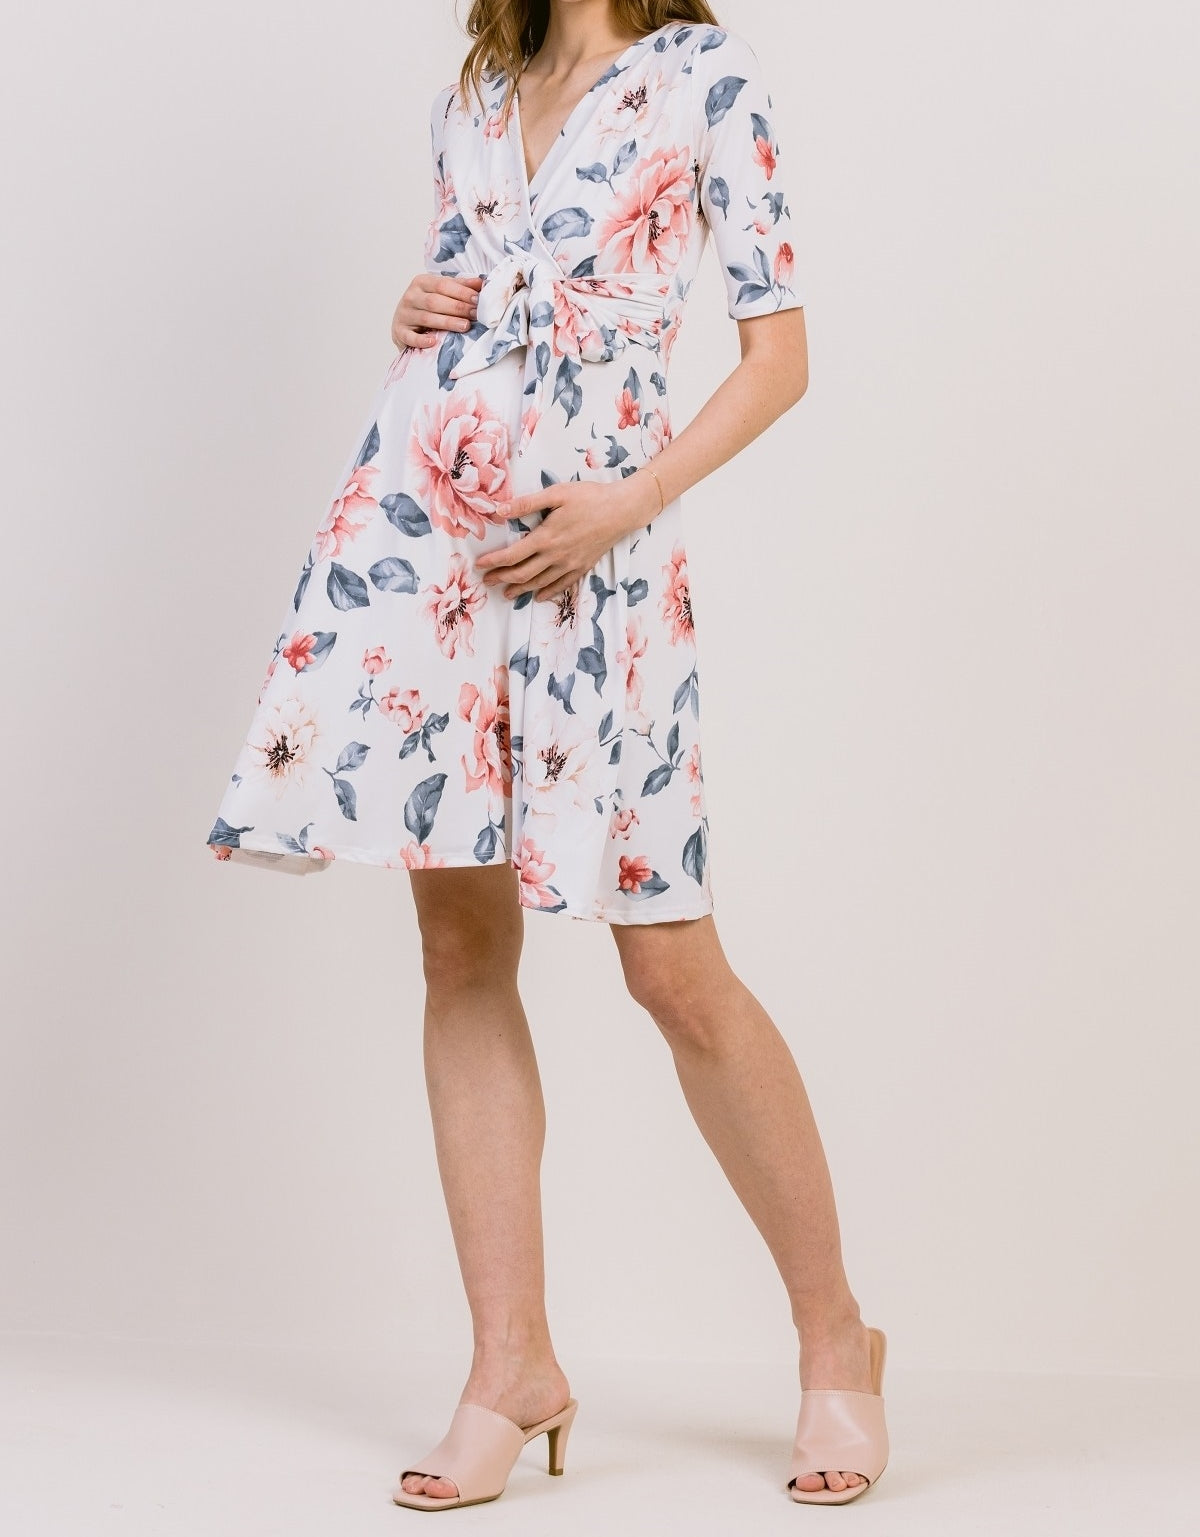 Be My Baby Floral Surplice Dress in Off White MATERNITY